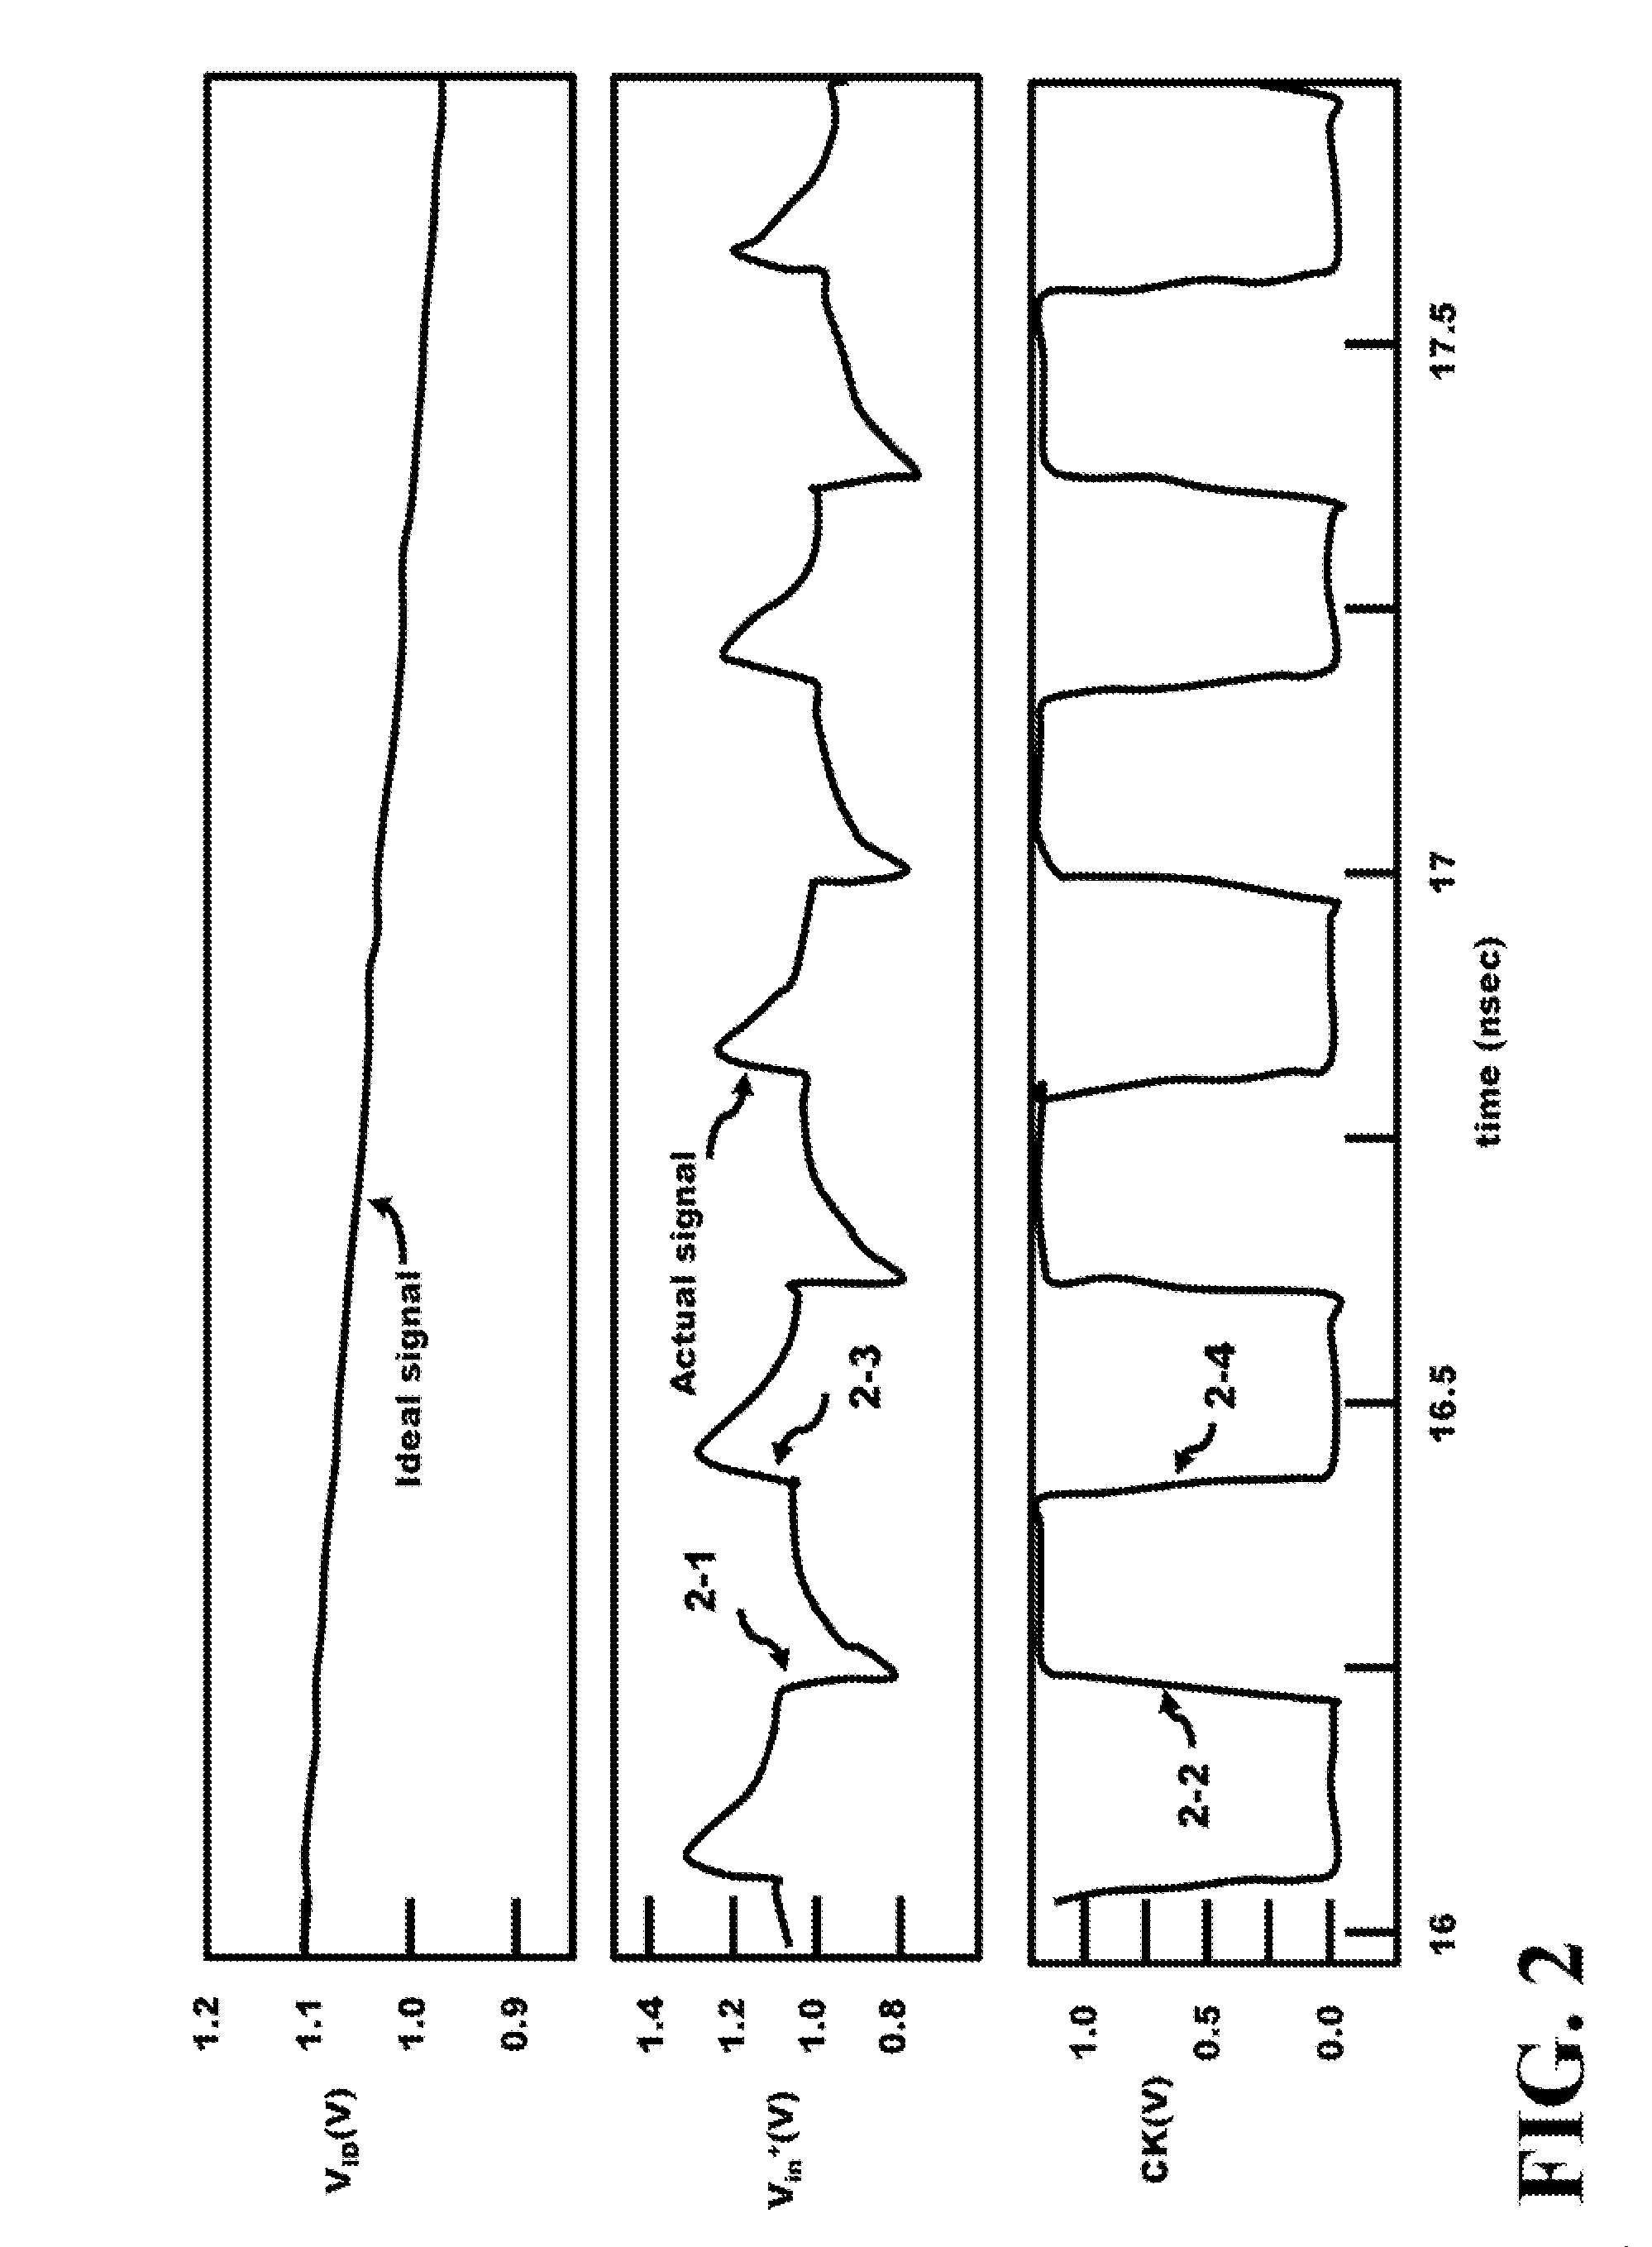 Method and Apparatus for an Active Negative-Capacitor Circuit to Cancel the Input Capacitance of Comparators